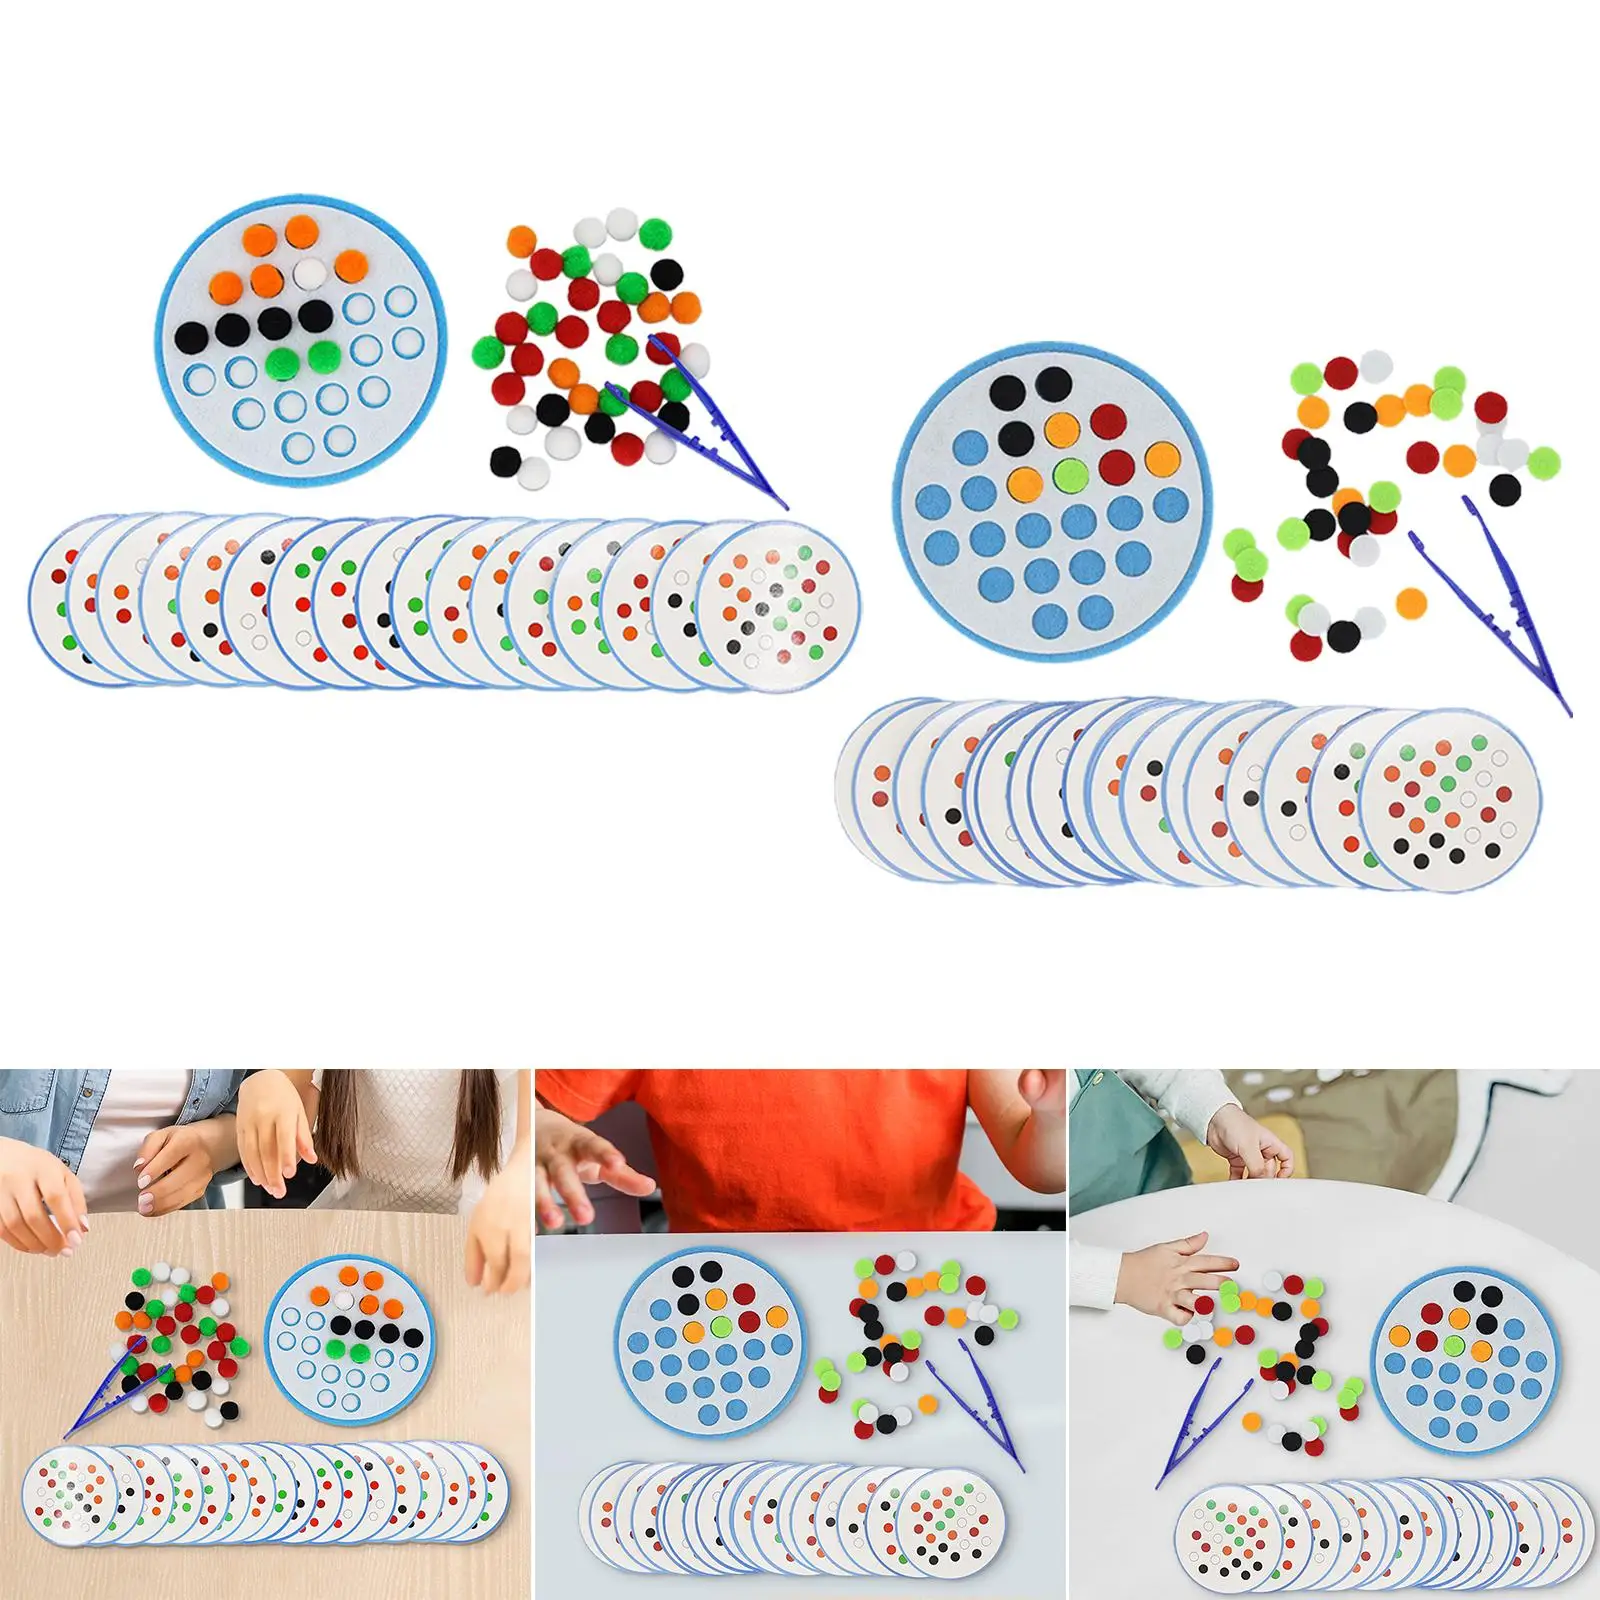 Early Childhood Education Color Matching Toy Interactive Toy Gifts Novelty for Learning Activities Home